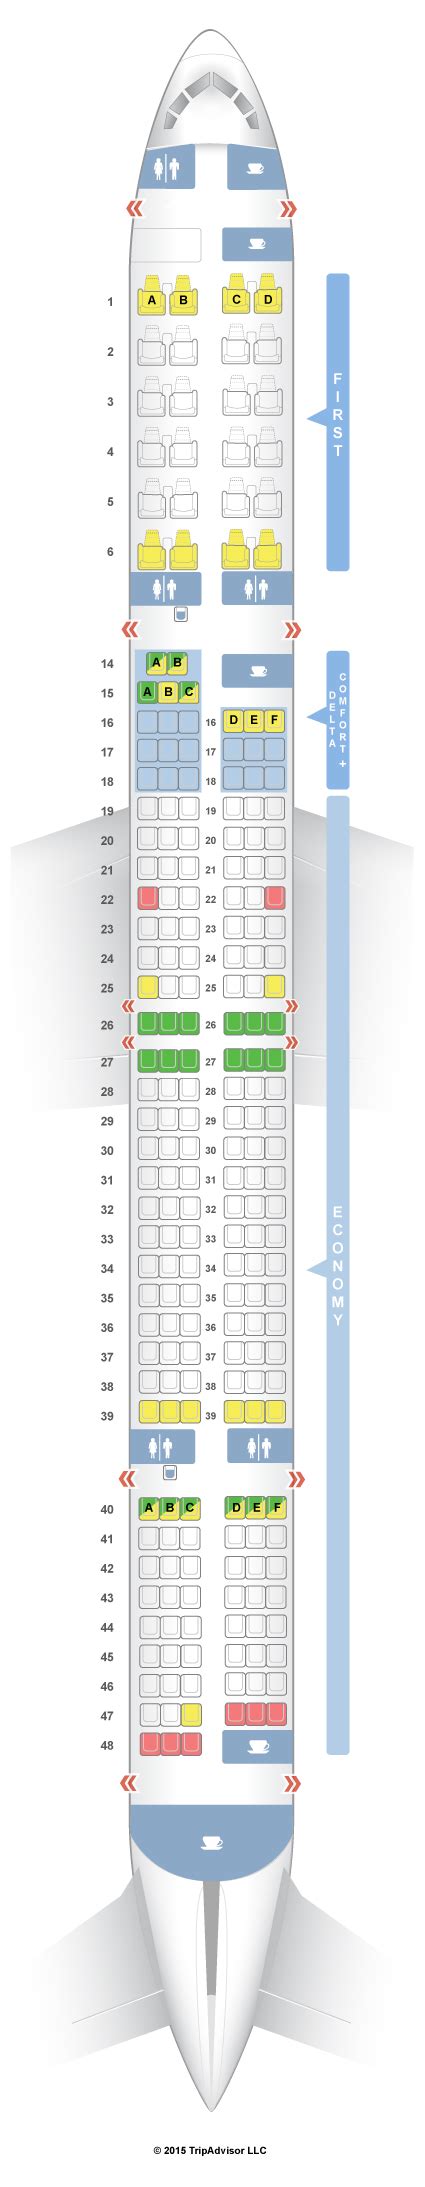 4/25/2020, seat 23F. from seatguru.com. My 23F seat is sold as Economy plus (extra fee). This maybe one of the best seats in this 757-300 economy class, given the extremely large extra legroom due to no seat in front of it. Surely worth the extra fee if you're considering economy plus option. 12/4/2019, seat 22B.. 